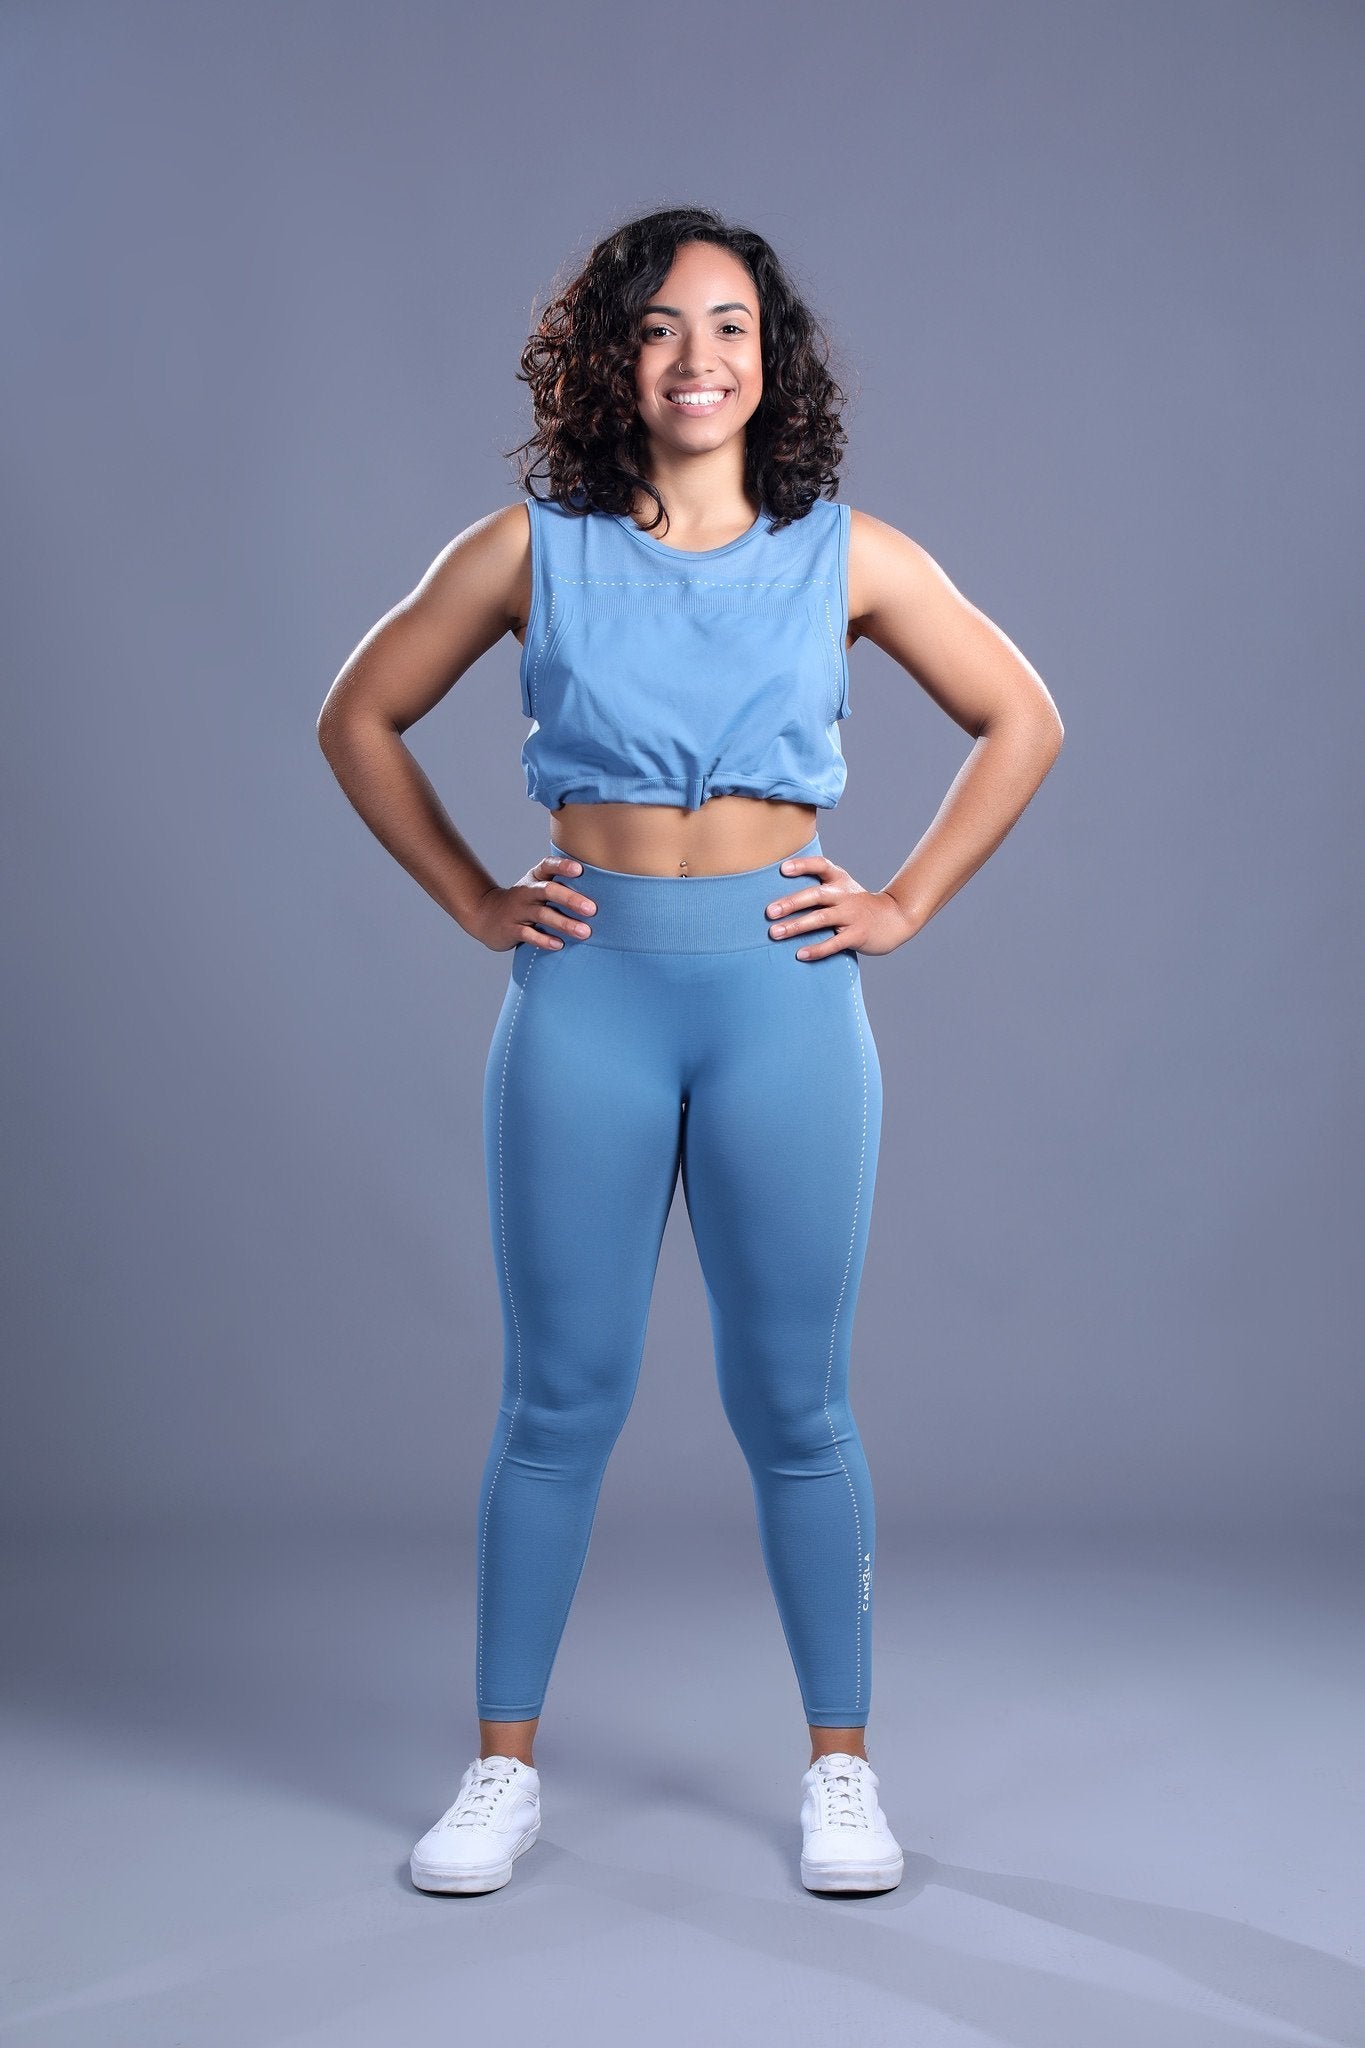 OBSESSION LIGHTWEIGHT SEAMLESS TIGHTS - OCEAN LINER - CanelaFitness